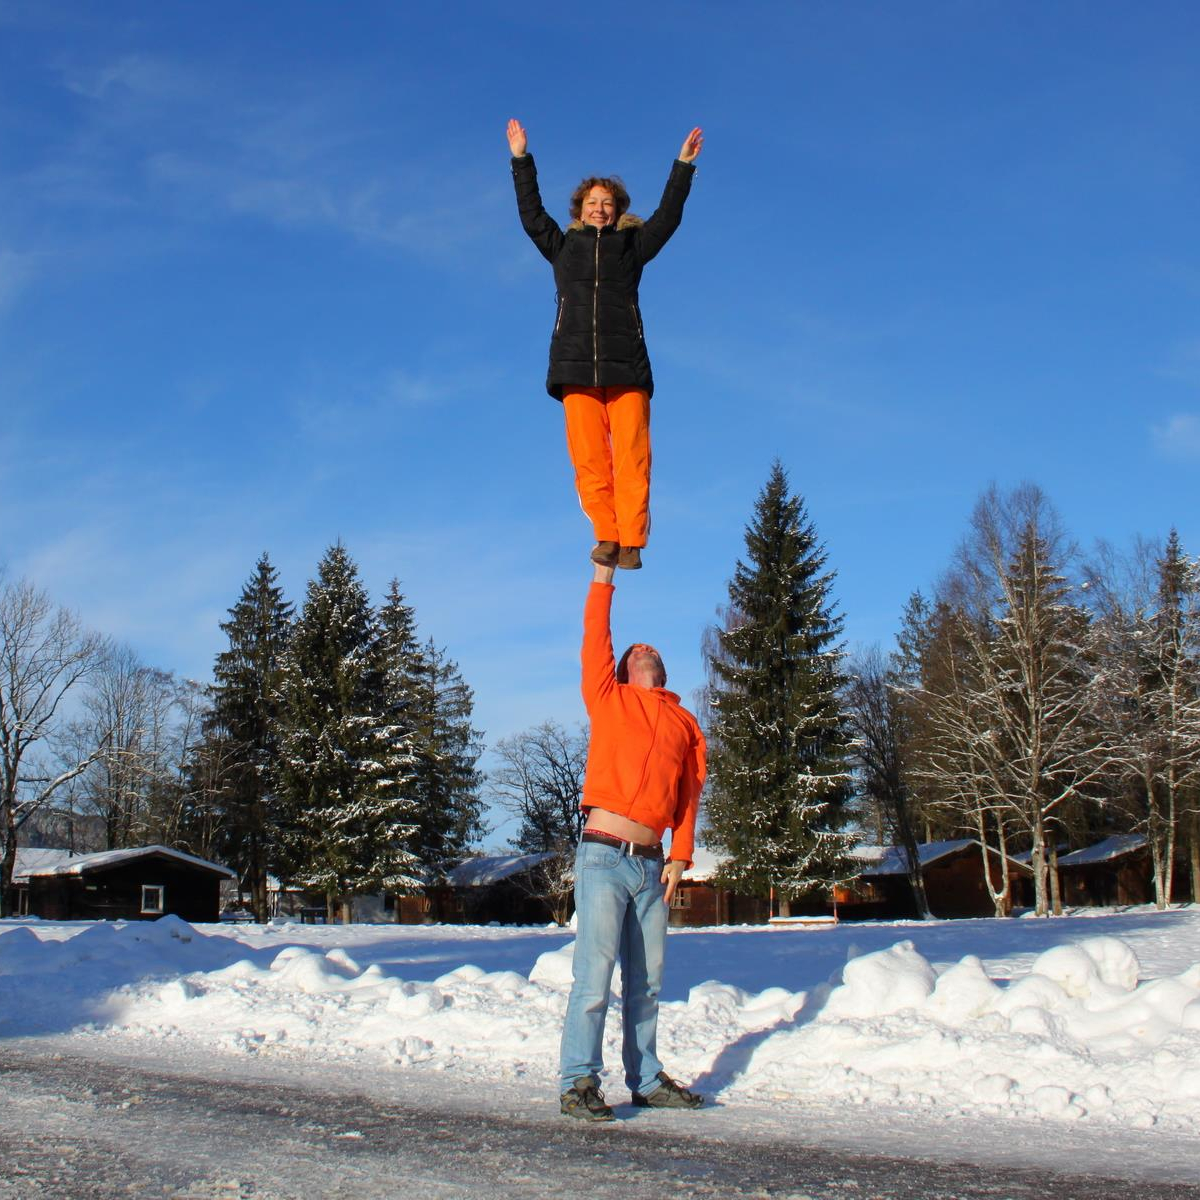 Wybren and Trudi at the Winter Acro 2022